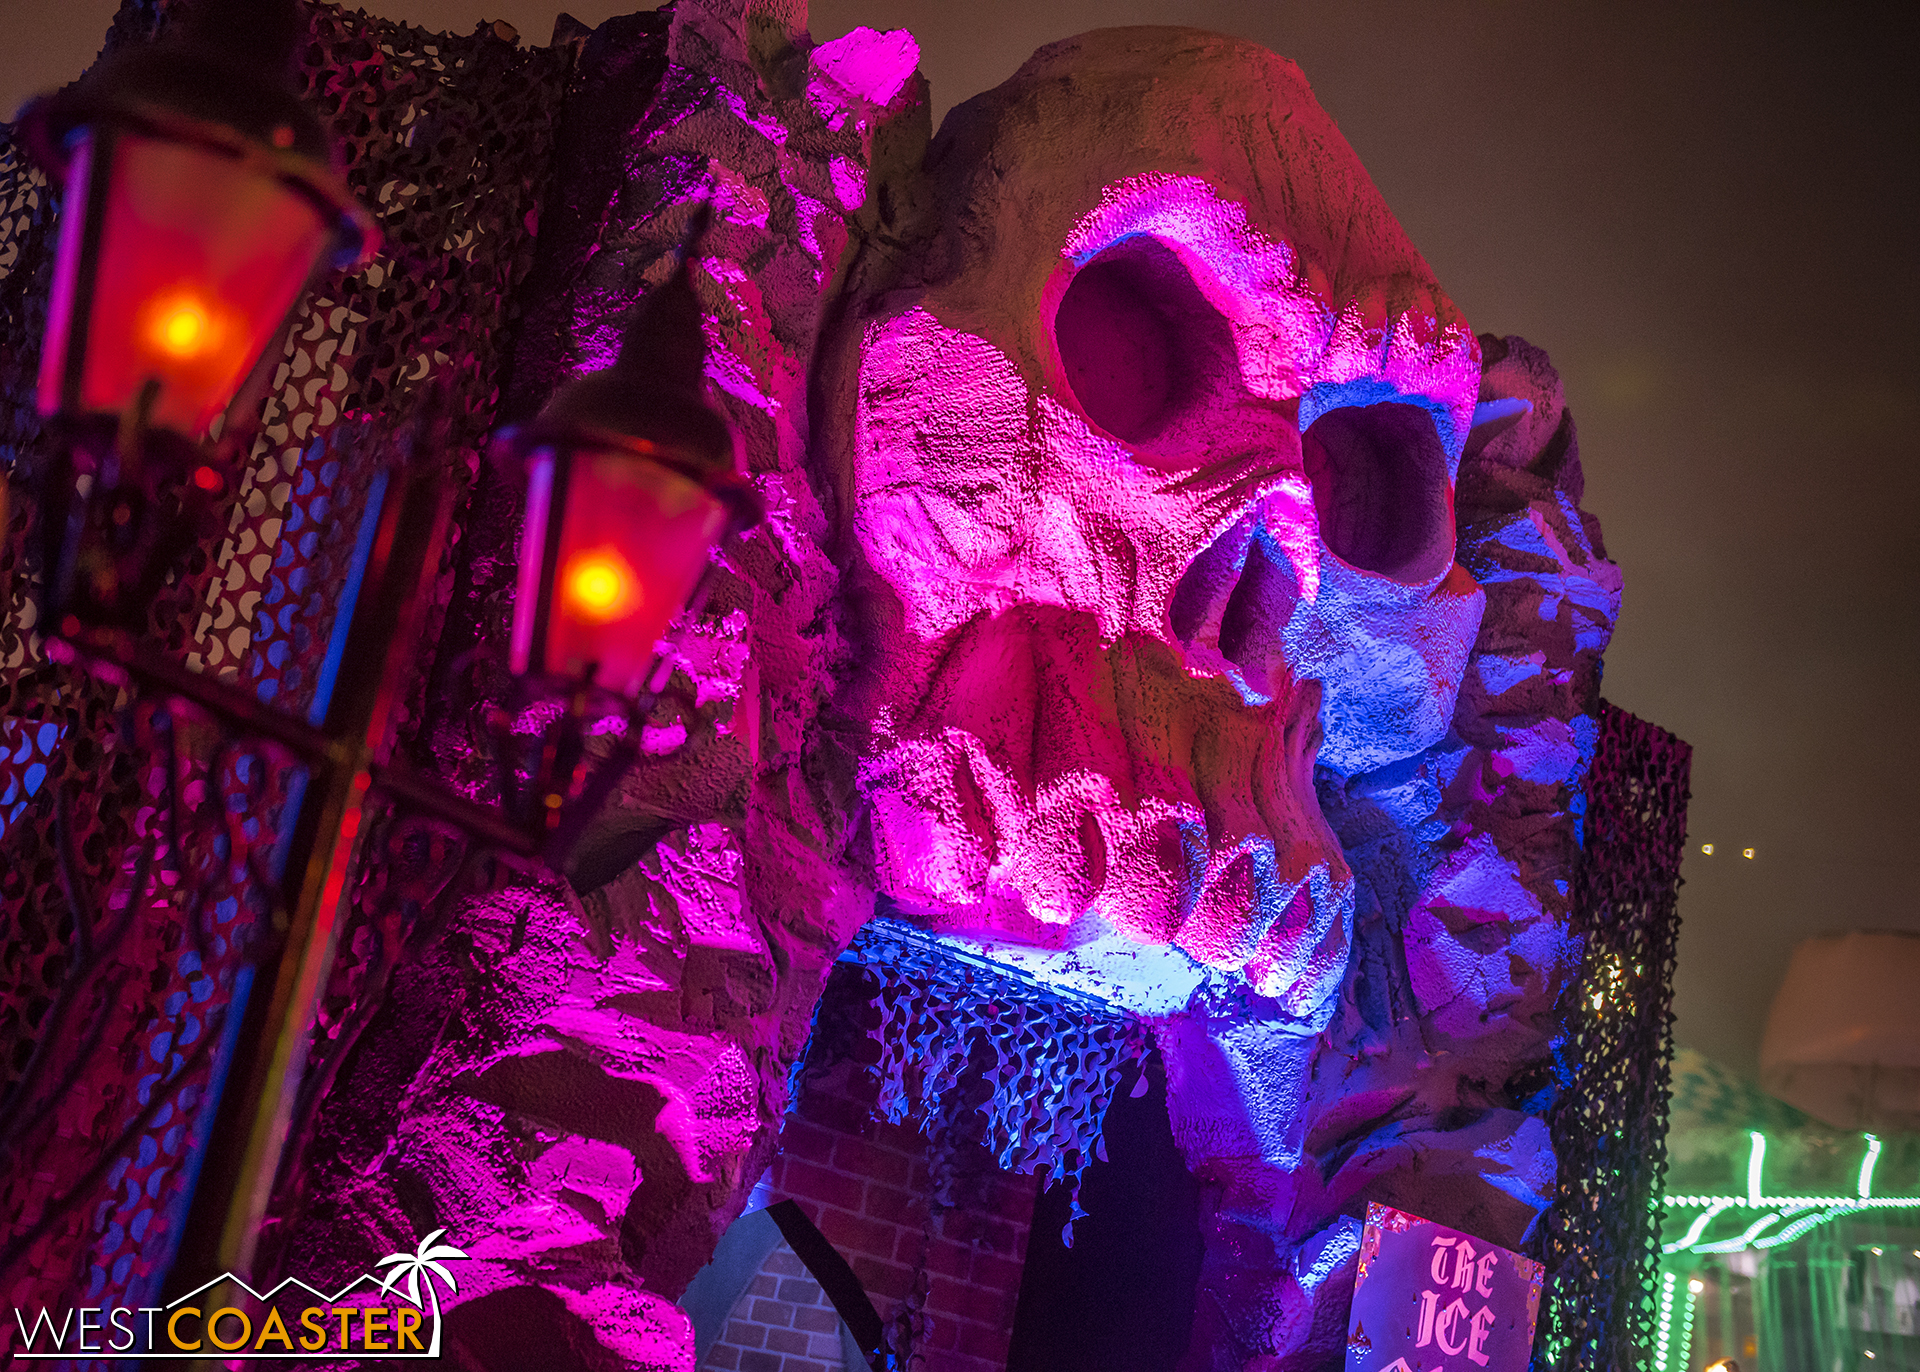  This magenta skull marks the Ice Cave ice bar. 